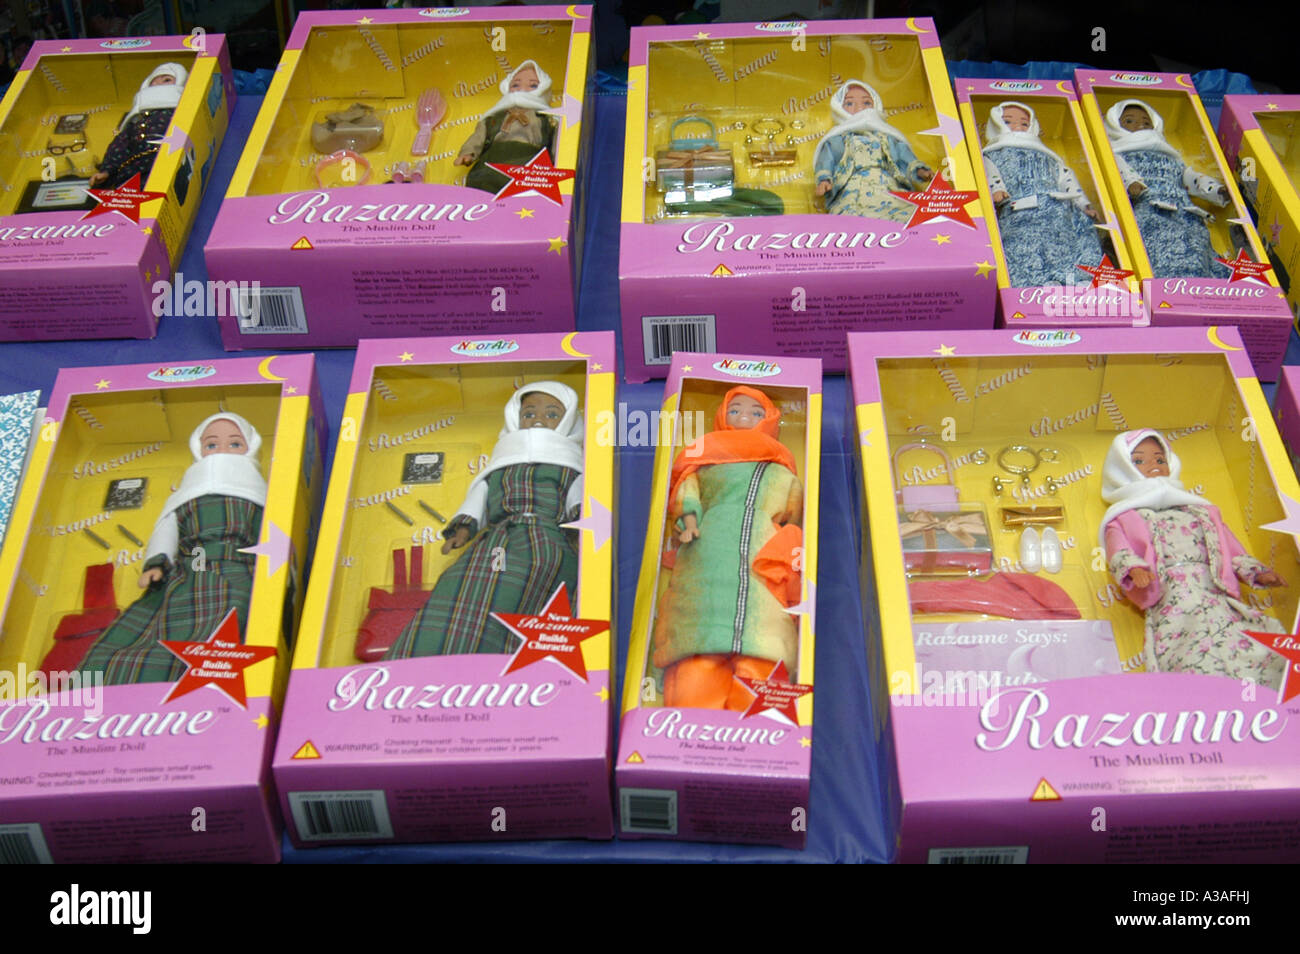 Razanne The Muslim Doll , Various Models In Boxes Stock Photo